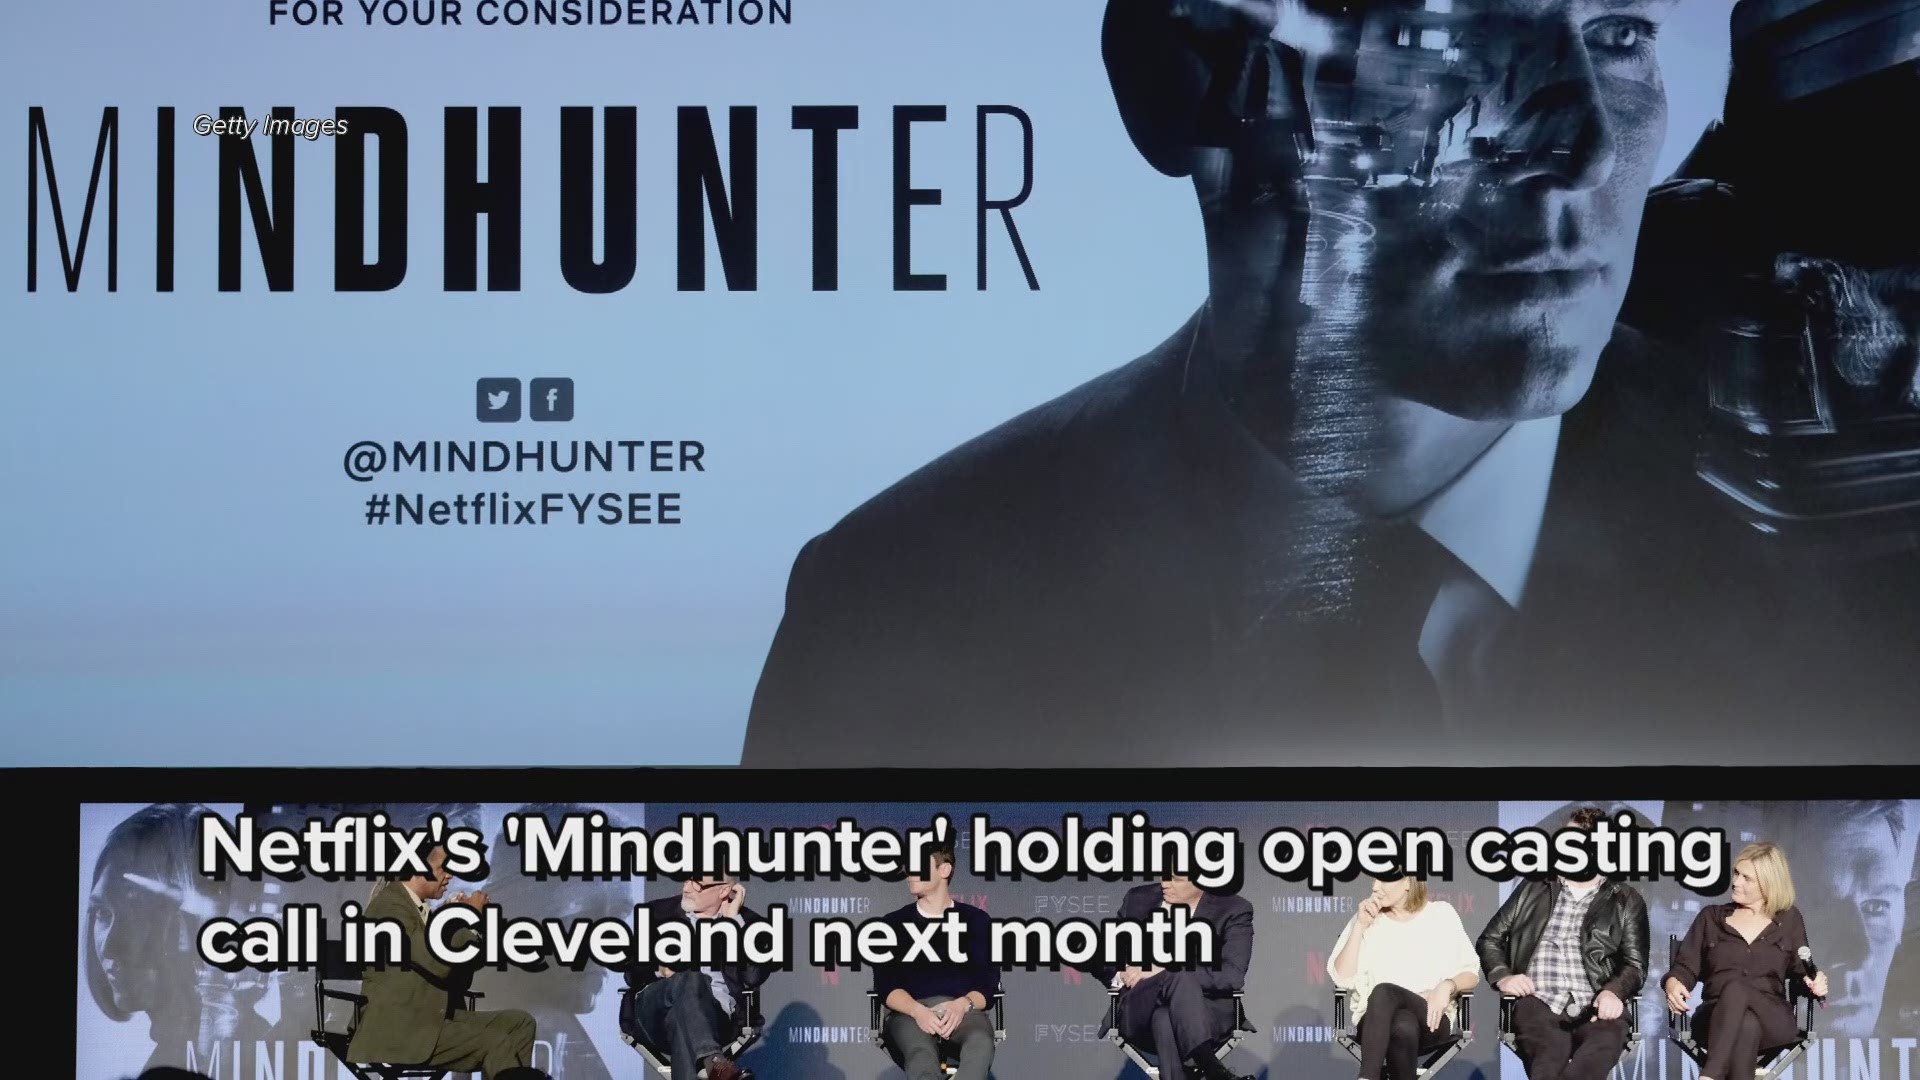 Netflix's 'Mindhunter' holding open casting call in Cleveland next month